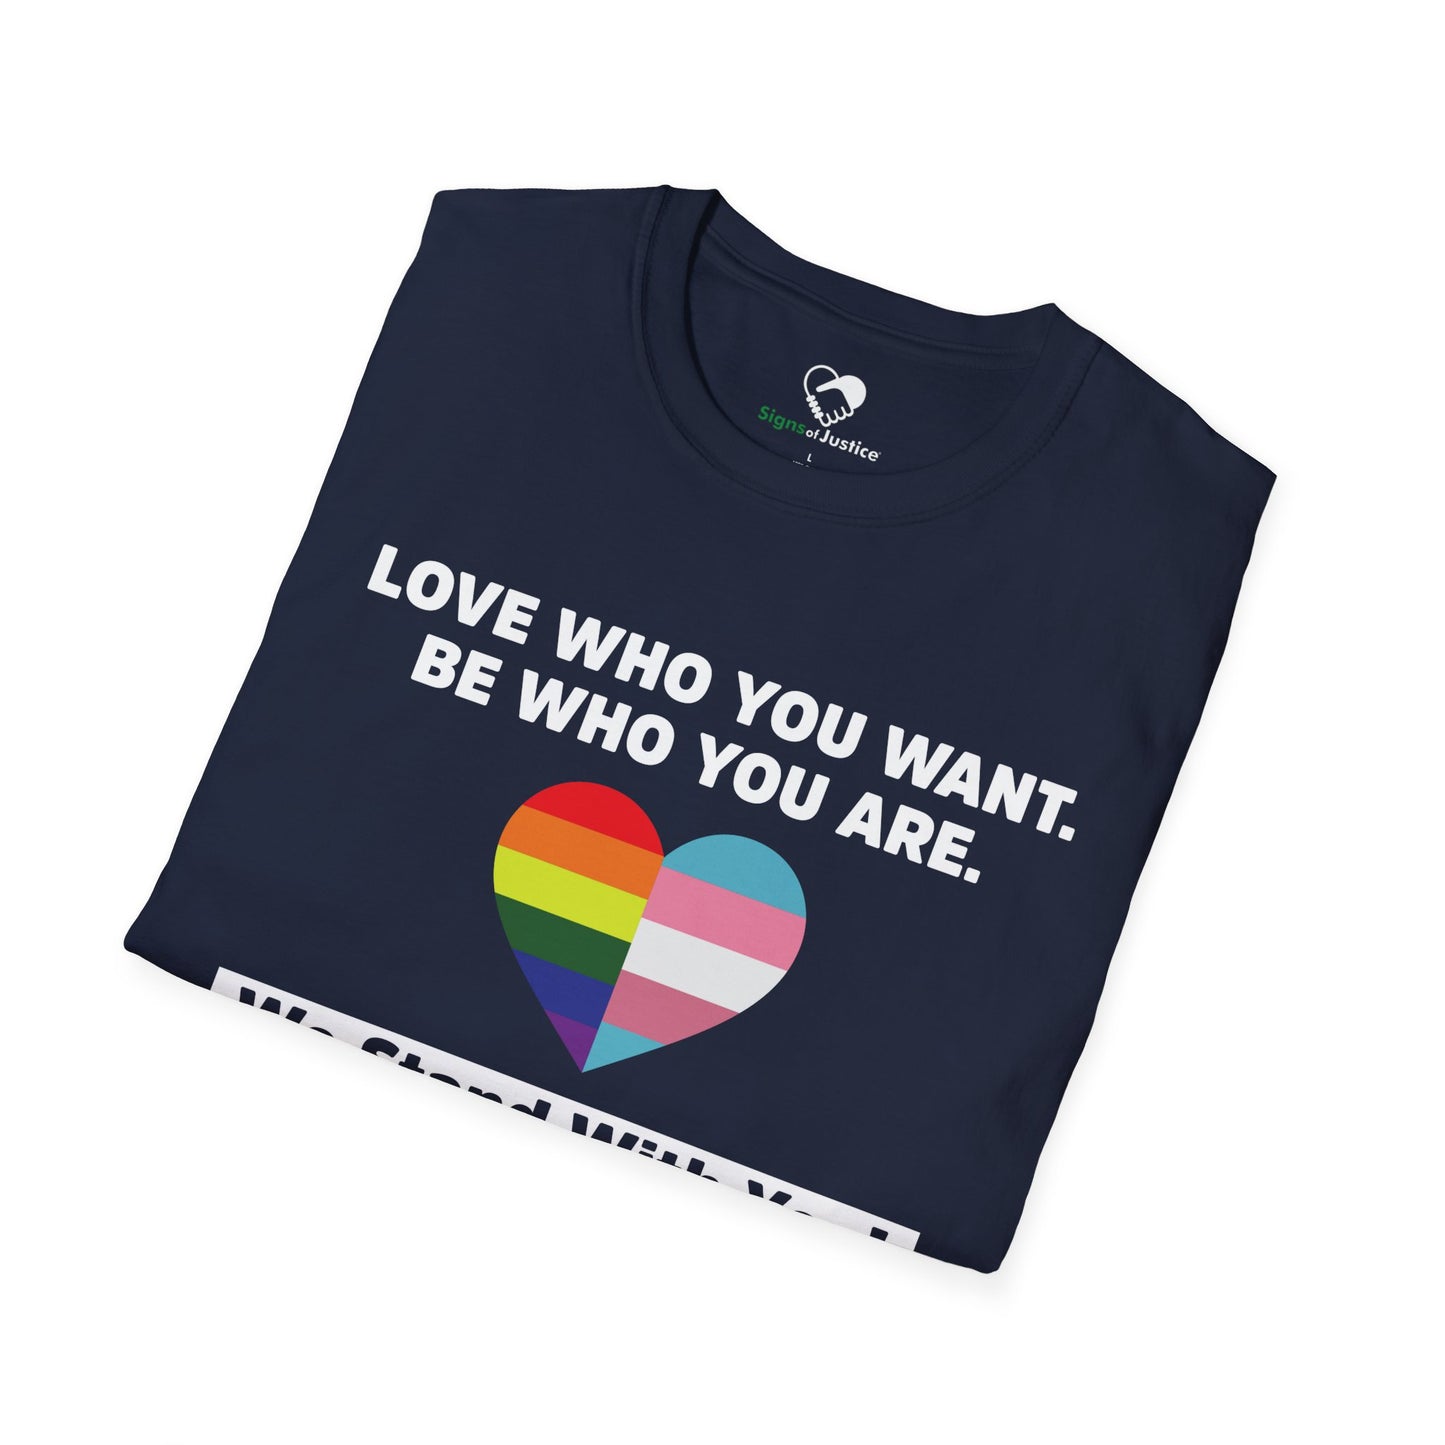 "Love Who You Want" Unisex T-Shirt